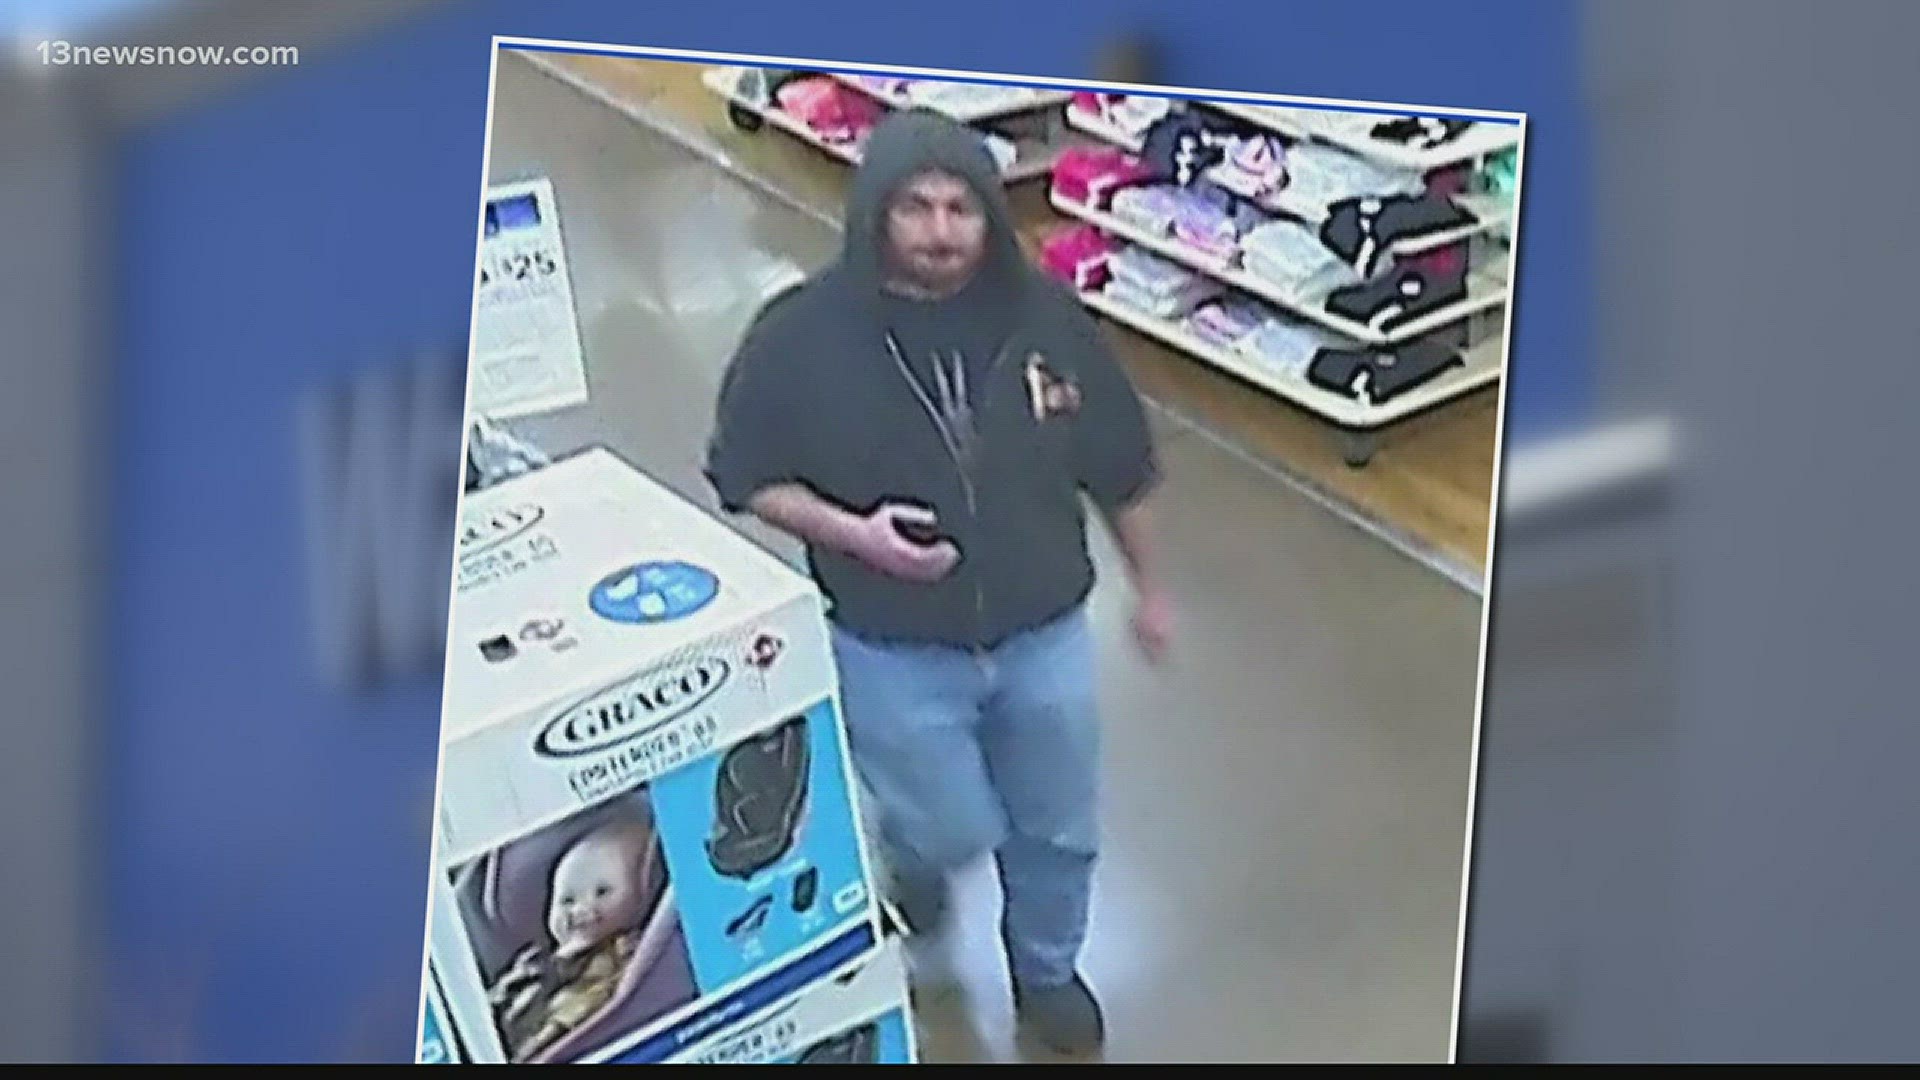 A man is accused of groping an 11-year-old girl inside a Norfolk Walmart